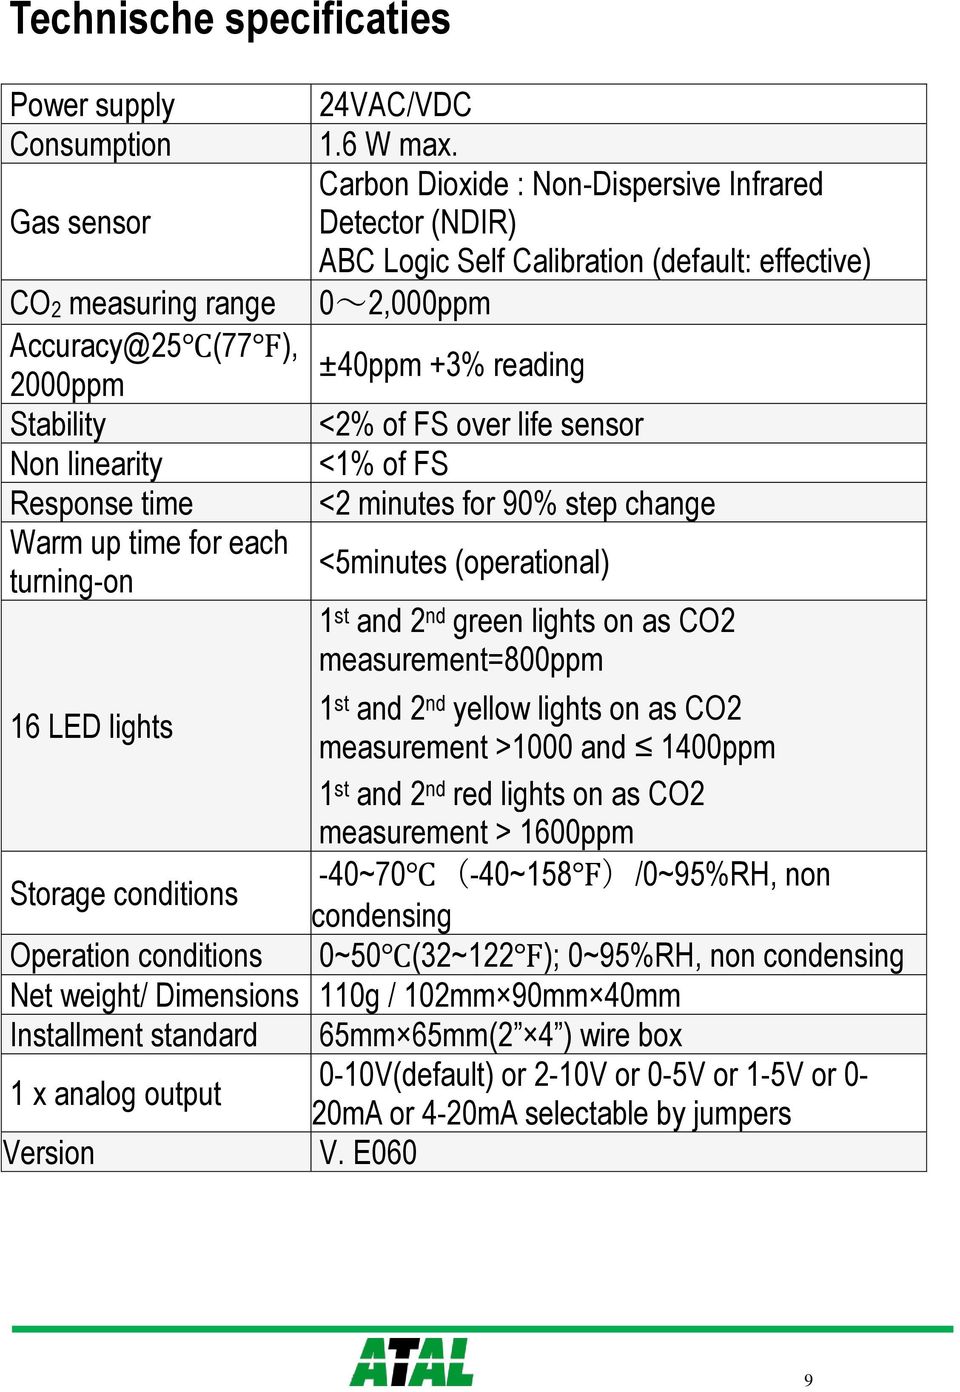 change <5minutes (operational) 1 st and 2 nd green lights on as CO2 measurement=800ppm 16 LED lights 1 st and 2 nd yellow lights on as CO2 measurement >1000 and 1400ppm 1 st and 2 nd red lights on as